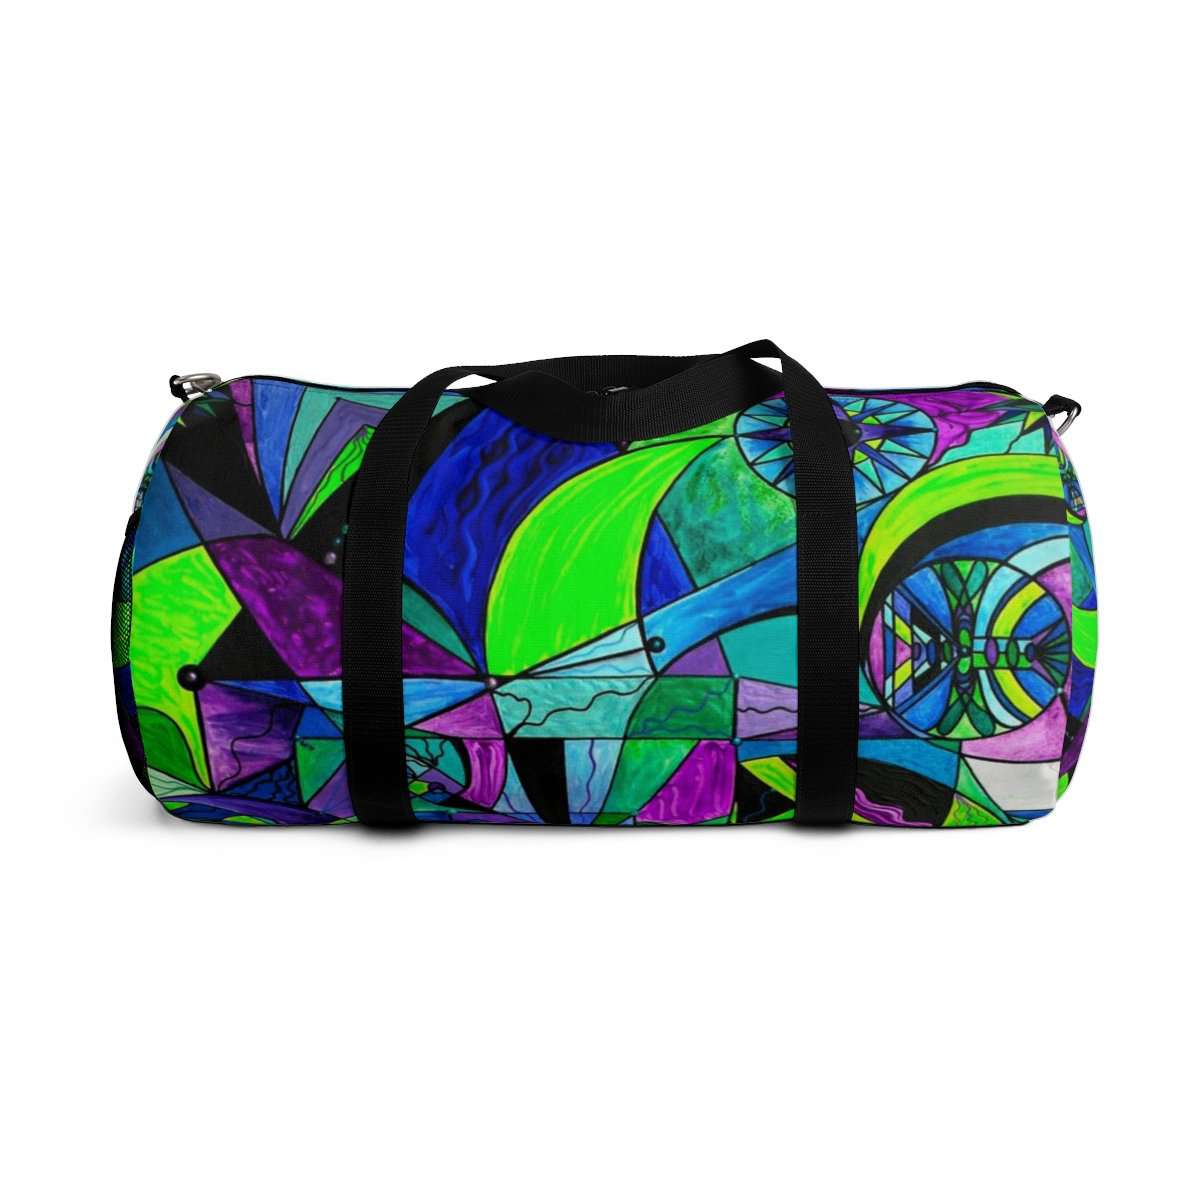 shop-online-and-get-your-favourite-arcturian-astral-travel-grid-duffle-bag-online_9.jpg